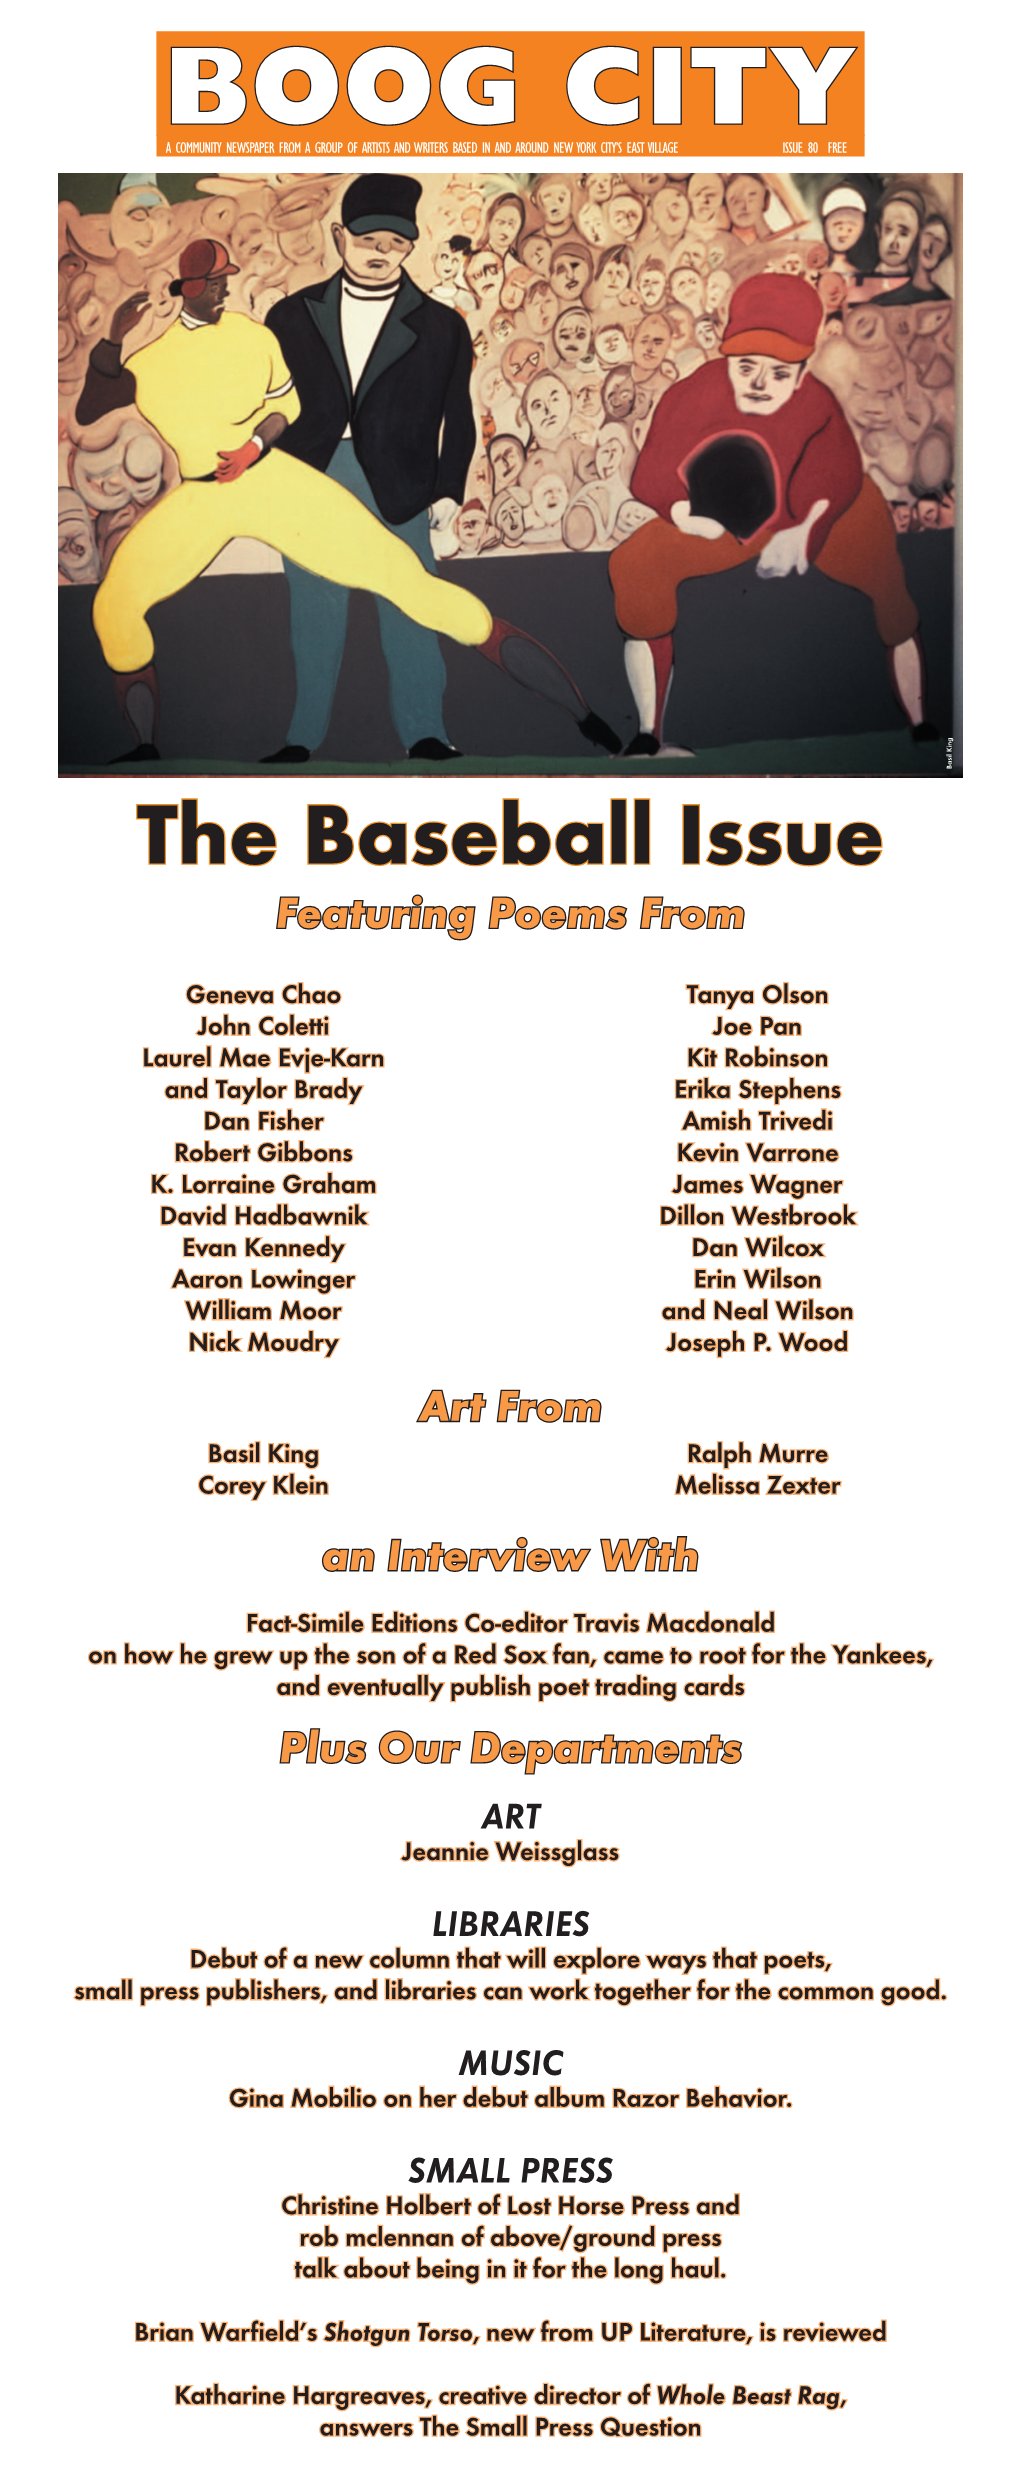 The Baseball Issue Featuring Poems From